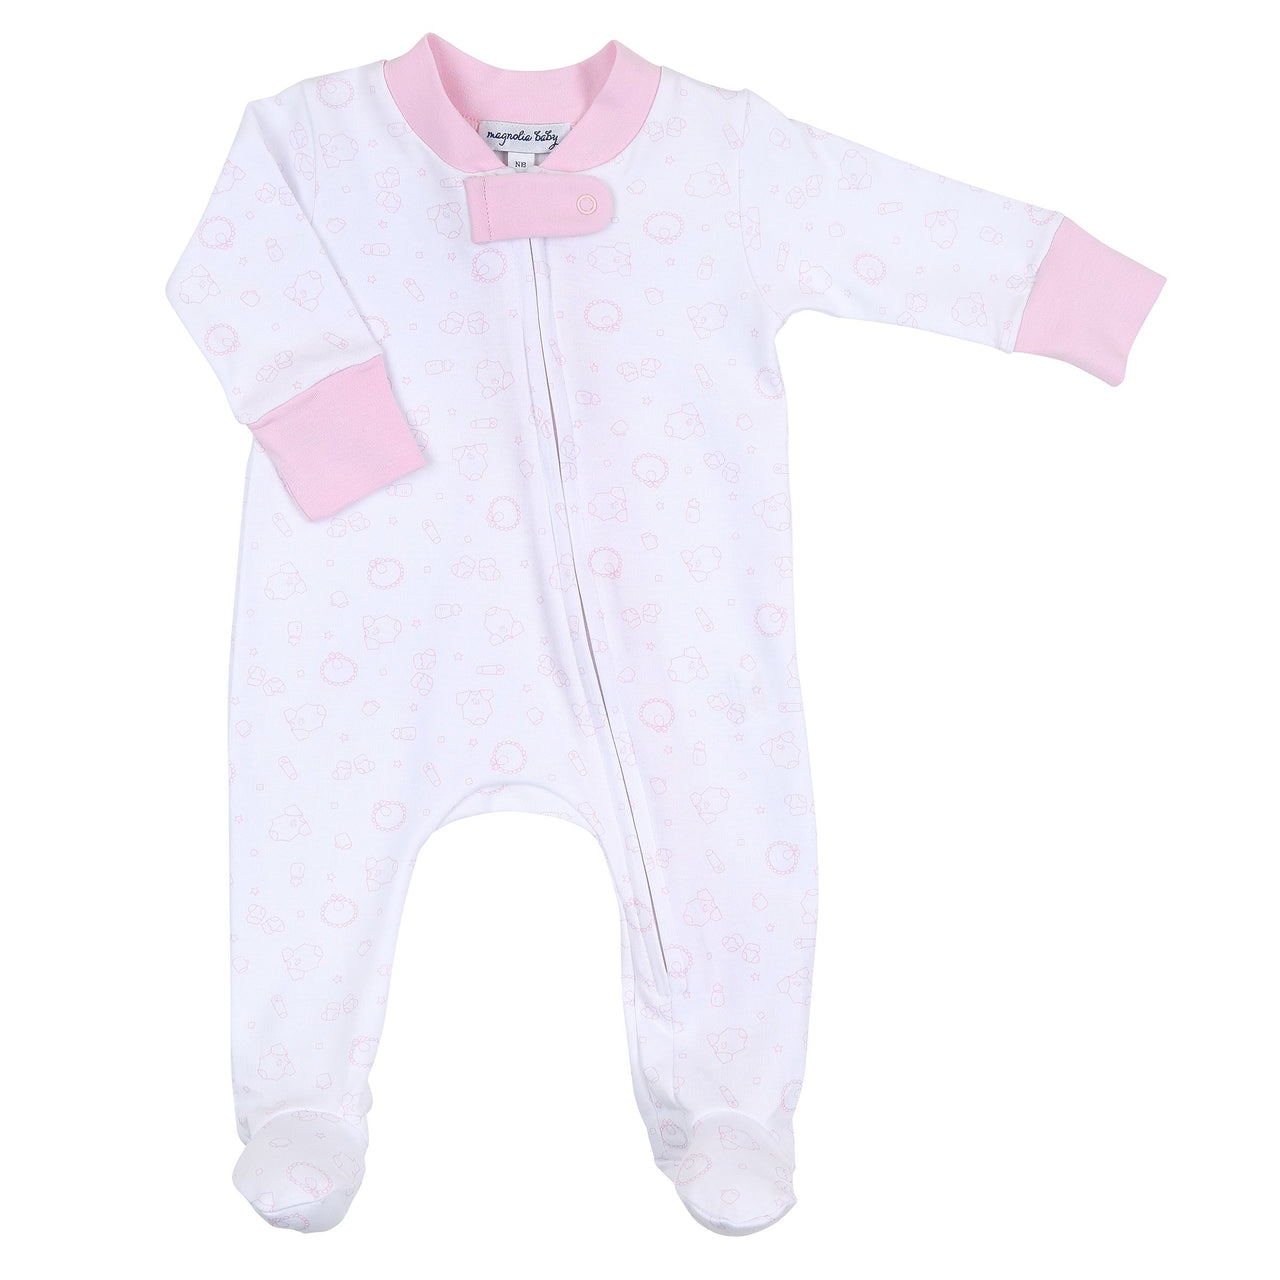 Magnolia Baby All Things Baby Printed Zipped Footie 1185-428